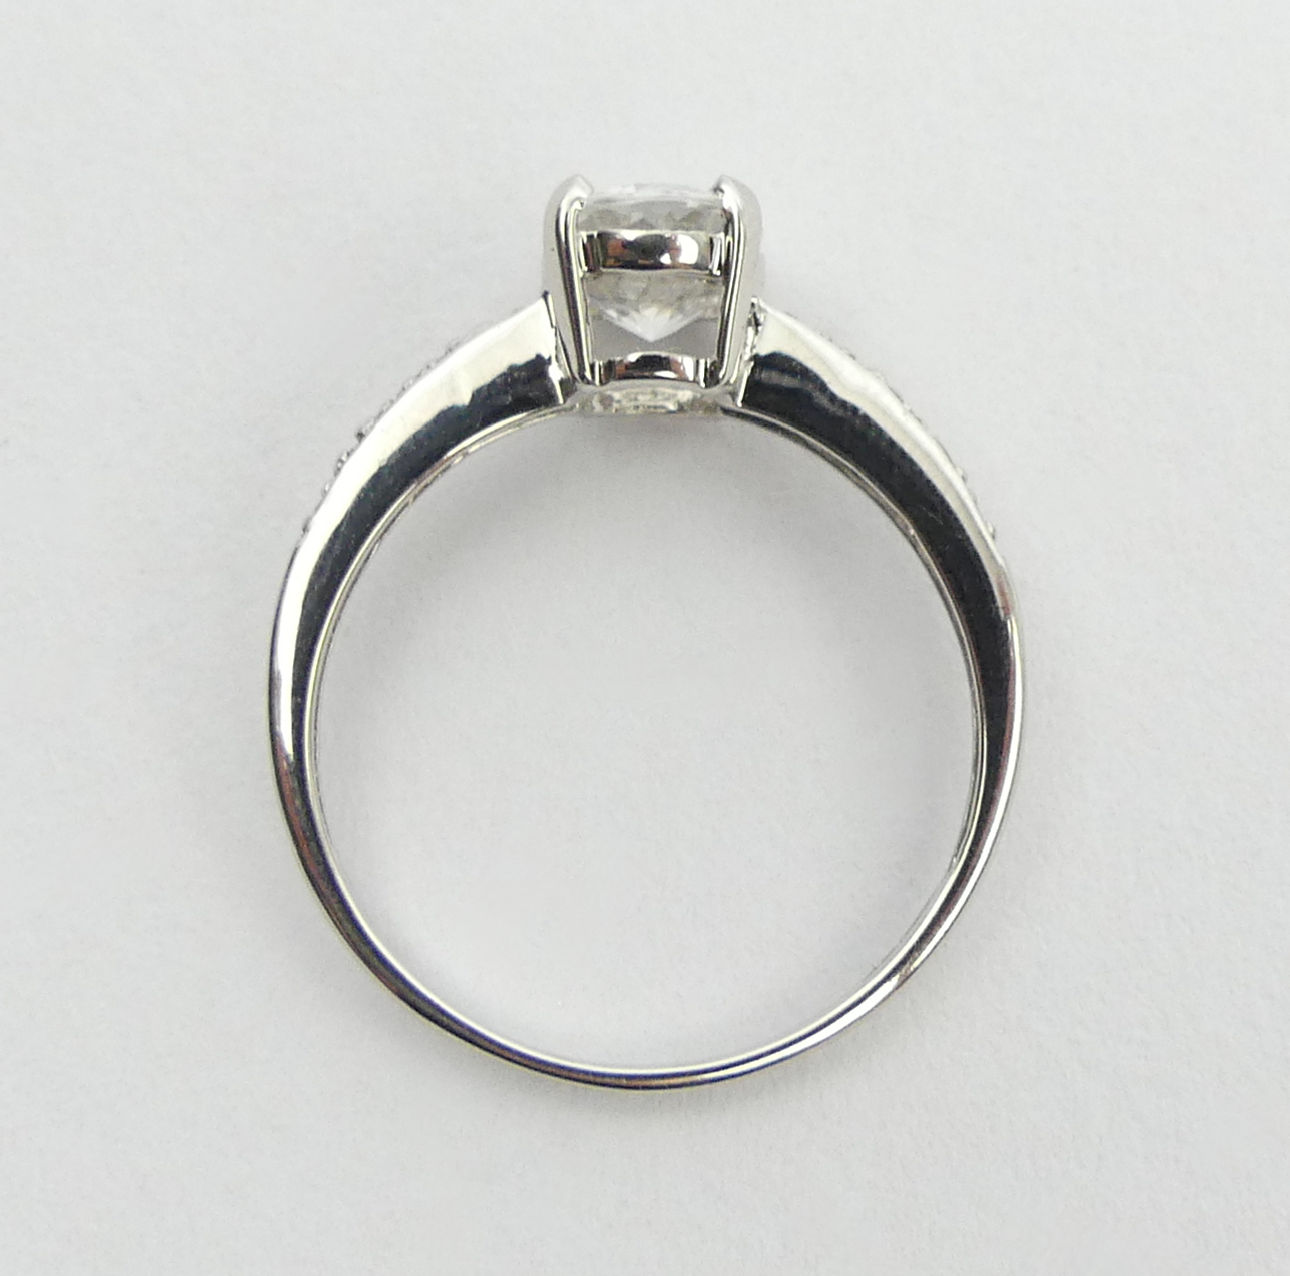 9ct white gold topaz and diamond ring, 1.9 grams, 8mm, size N1/2. UK Postage £12. - Image 4 of 6